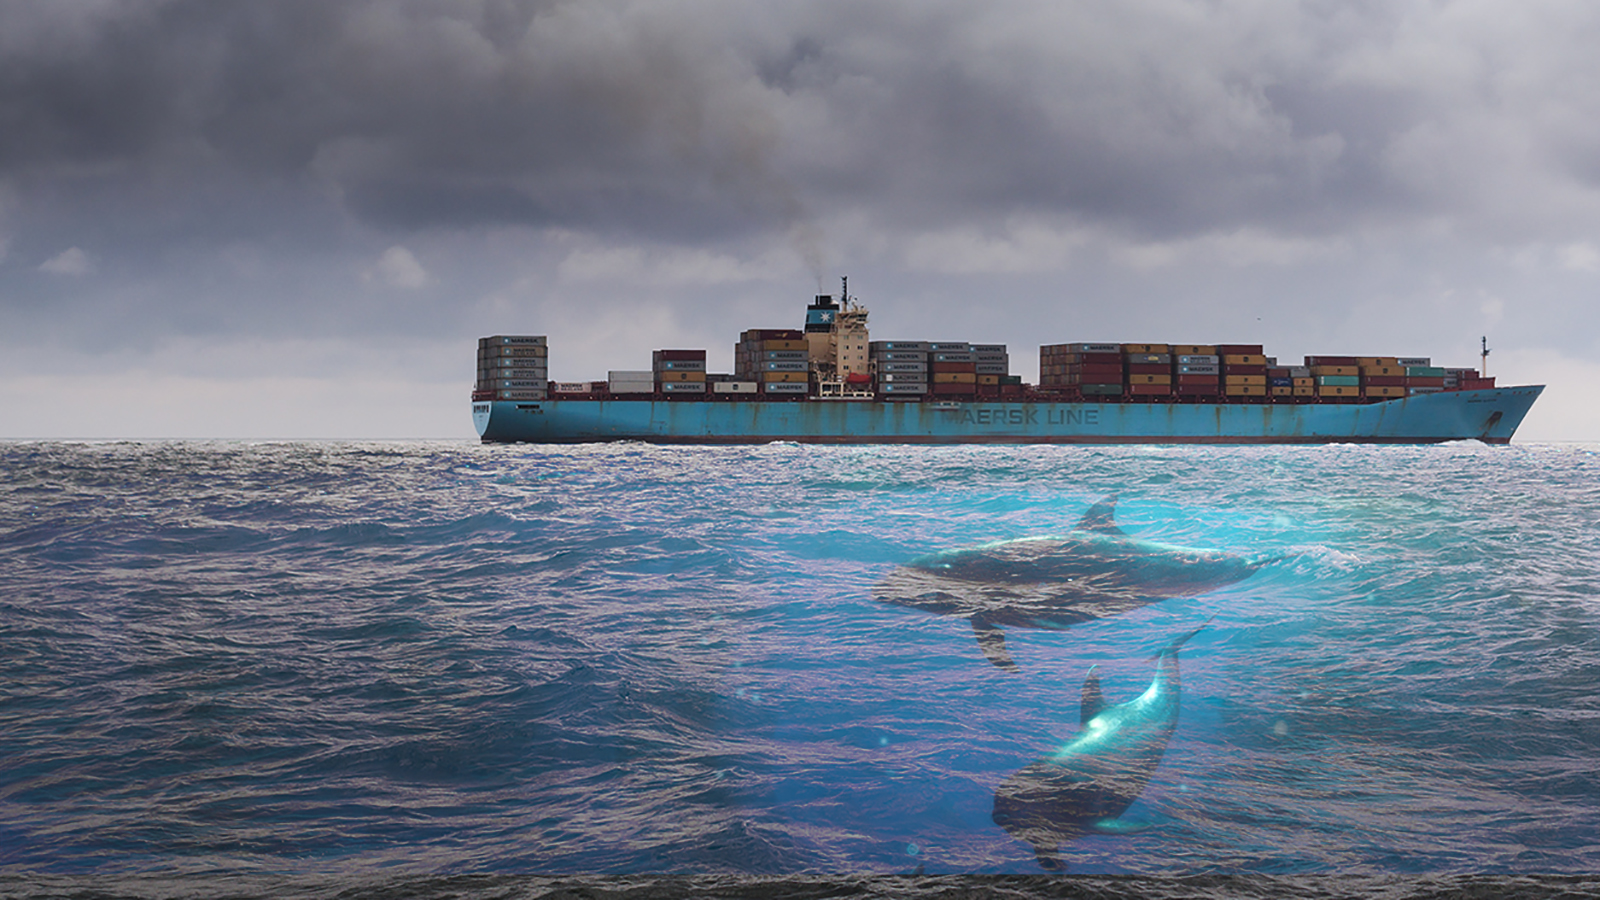 An image of a shipping container ship on the open ocean, above two whales.